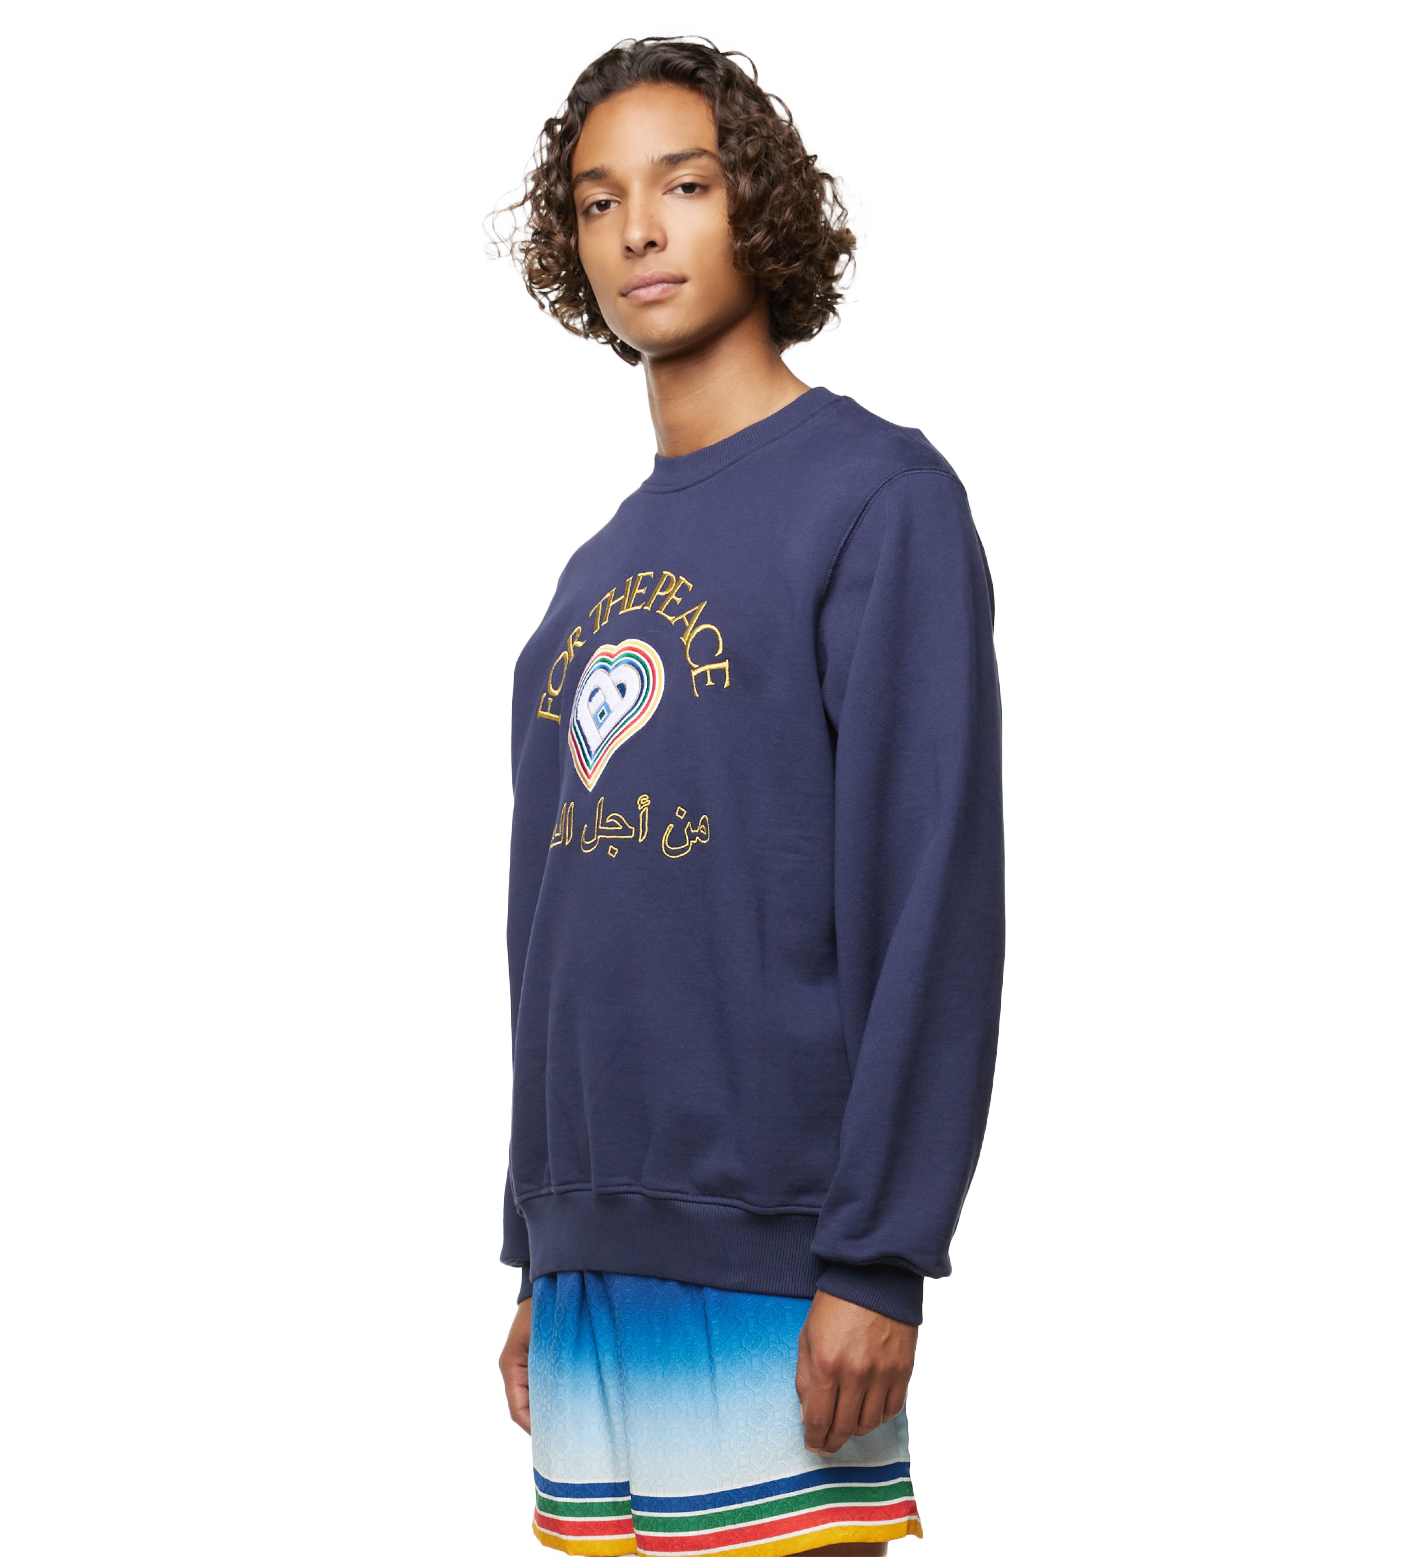 For The Peace Crewneck Navy